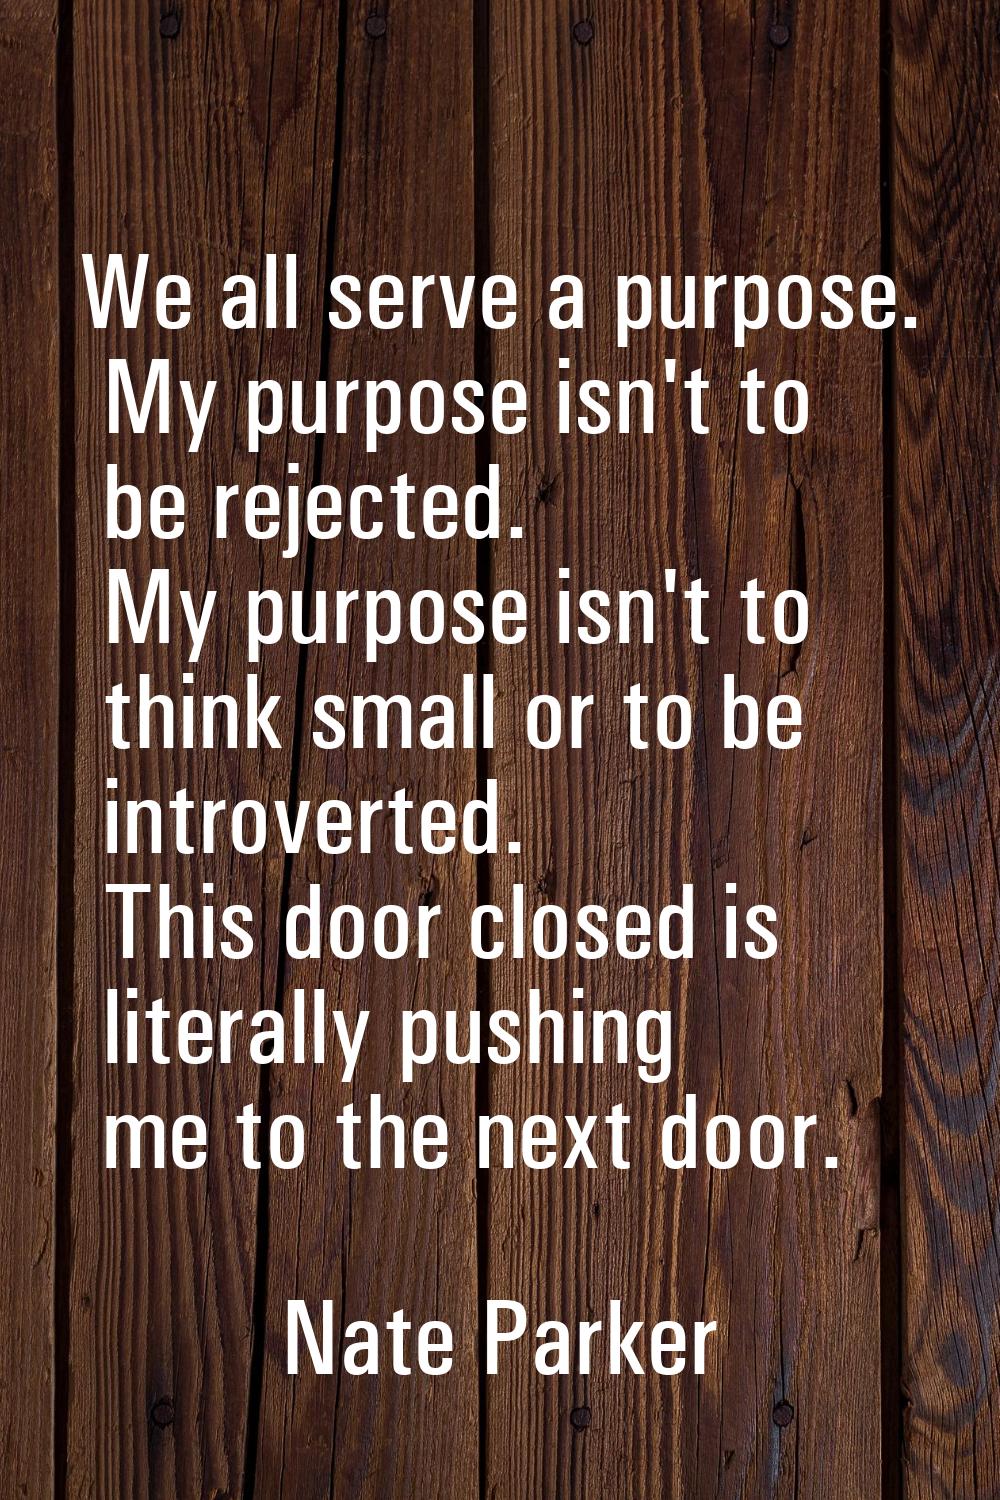 We all serve a purpose. My purpose isn't to be rejected. My purpose isn't to think small or to be i